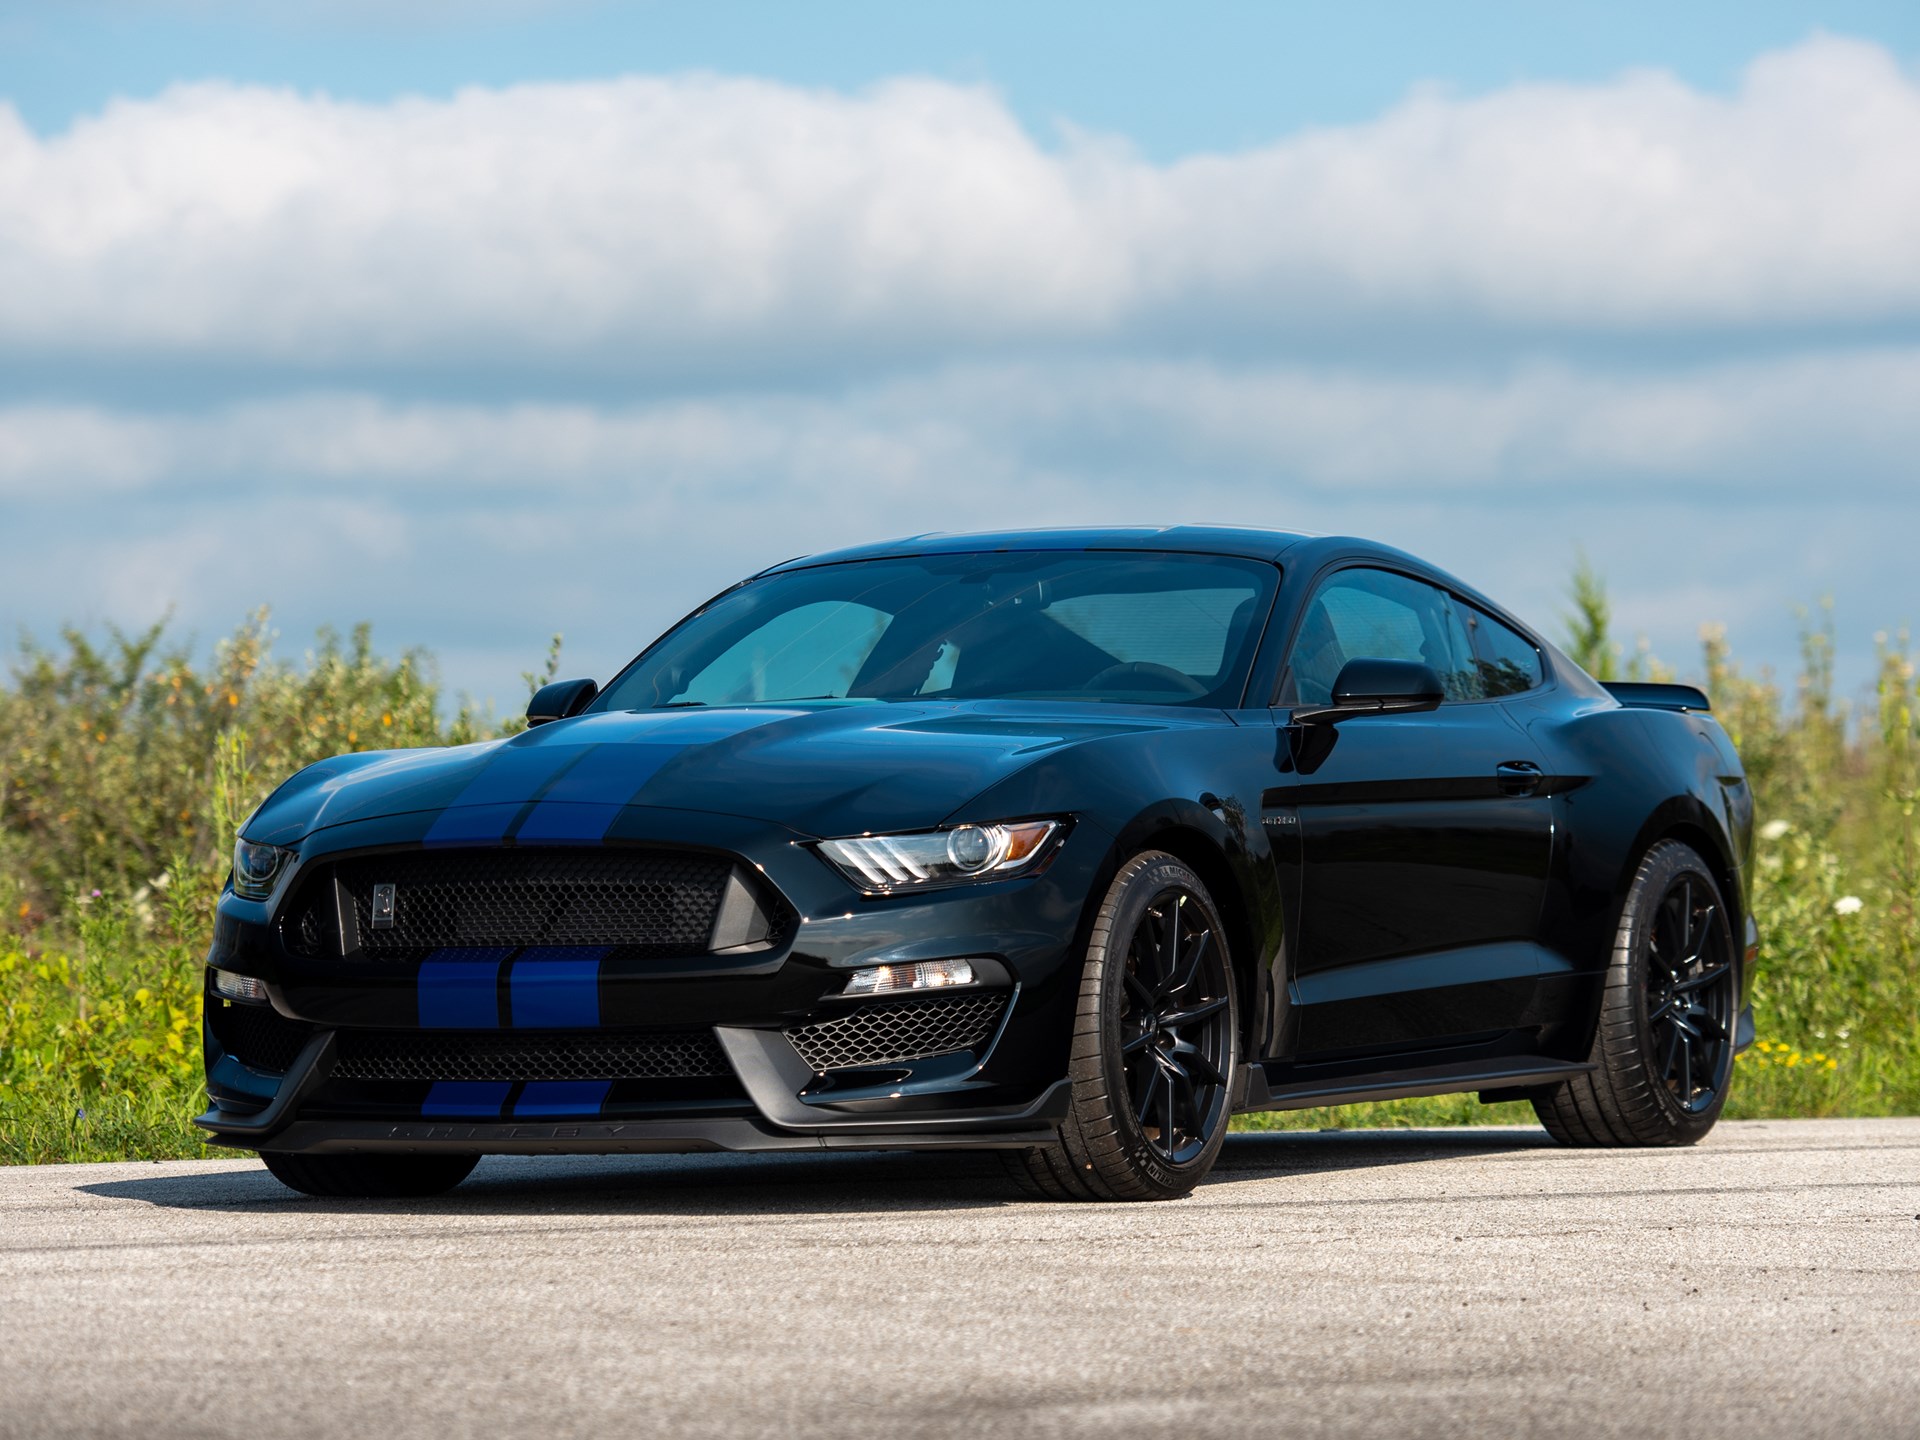 2015 Ford Shelby GT350 '50th Anniversary' | Auburn Fall 2021 | RM Sotheby's